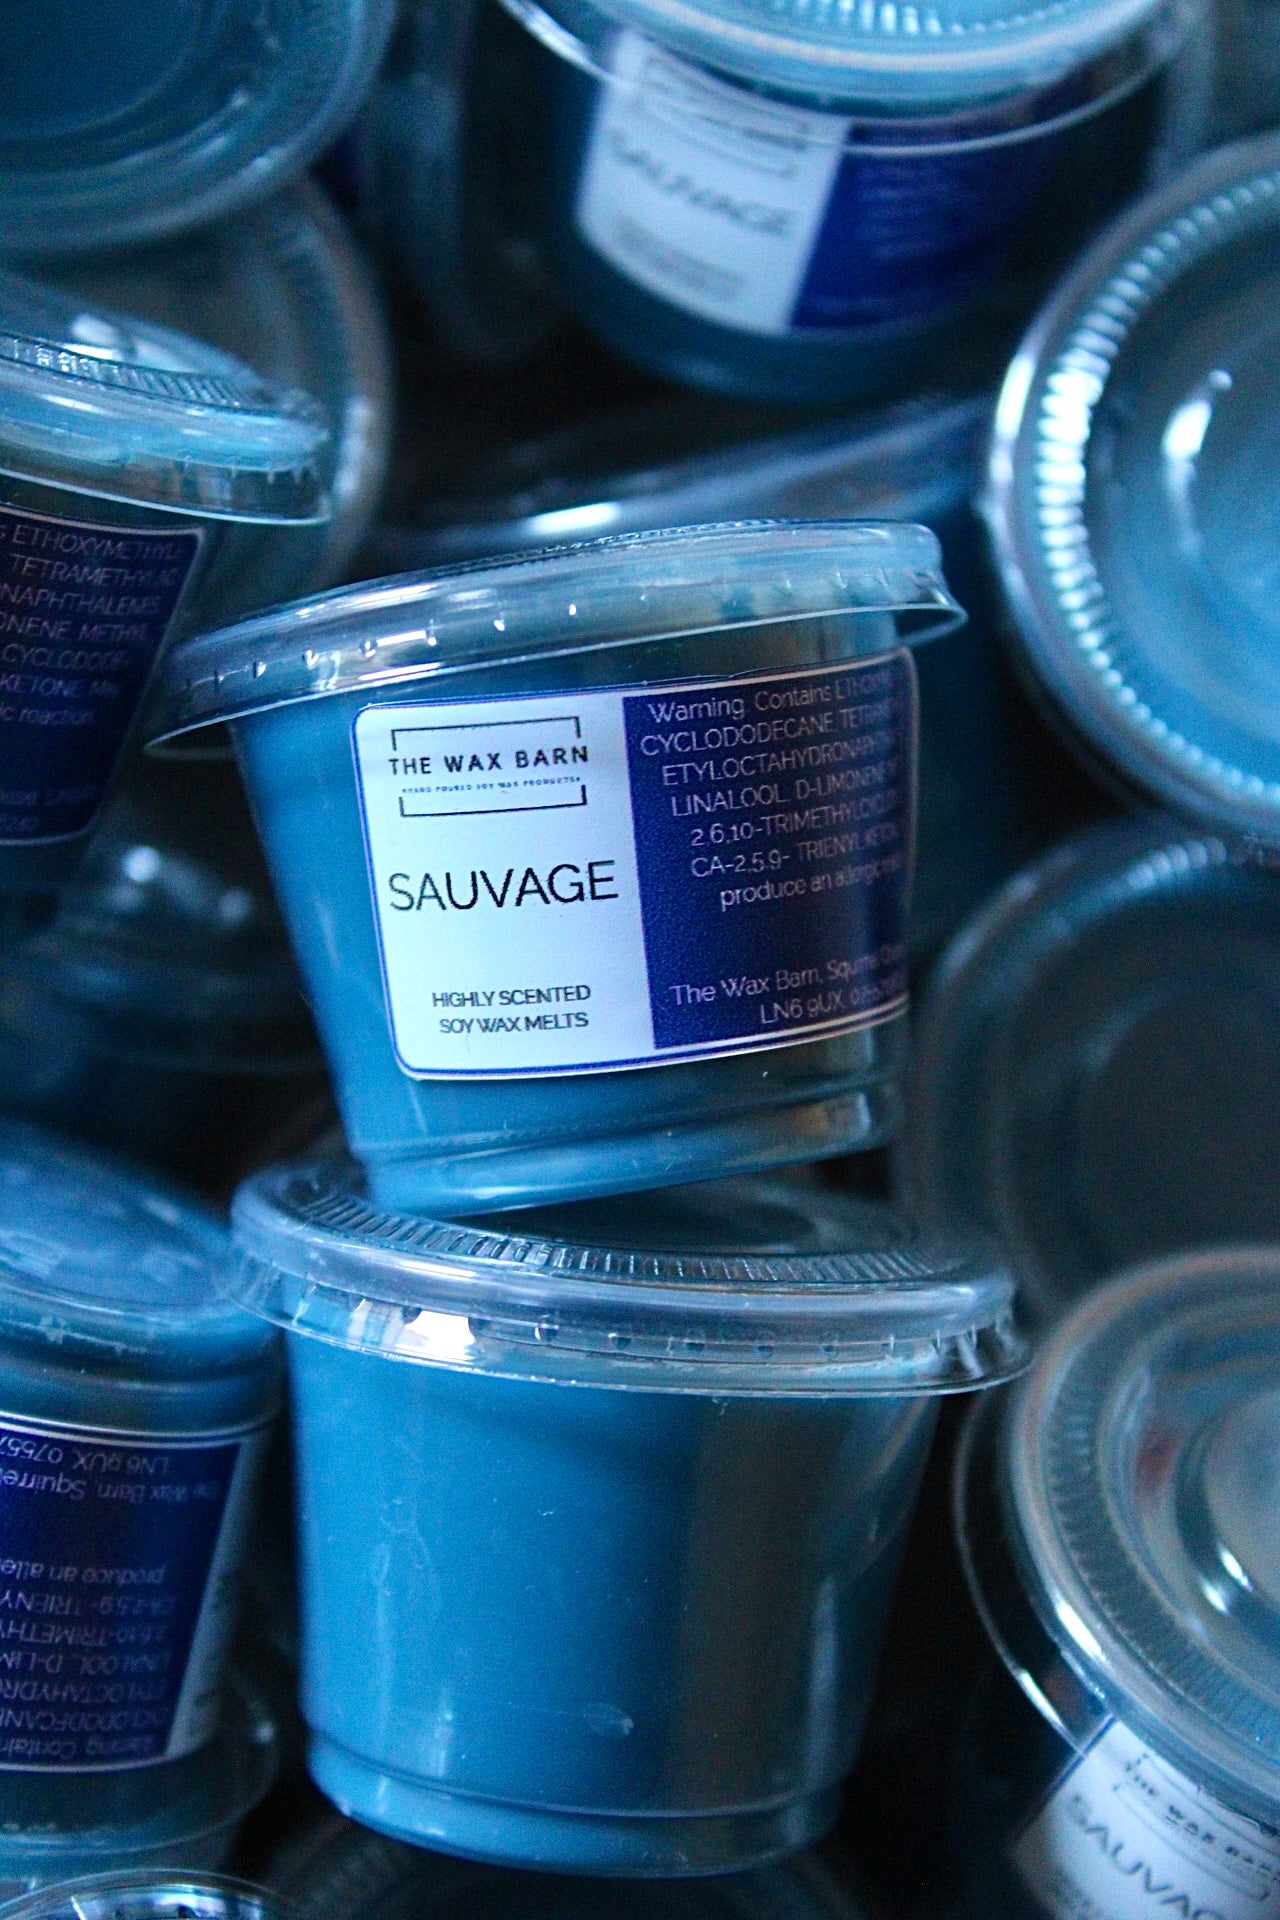 Sauvage (Dior Savauge Aftershave Inspired) Sample Pot